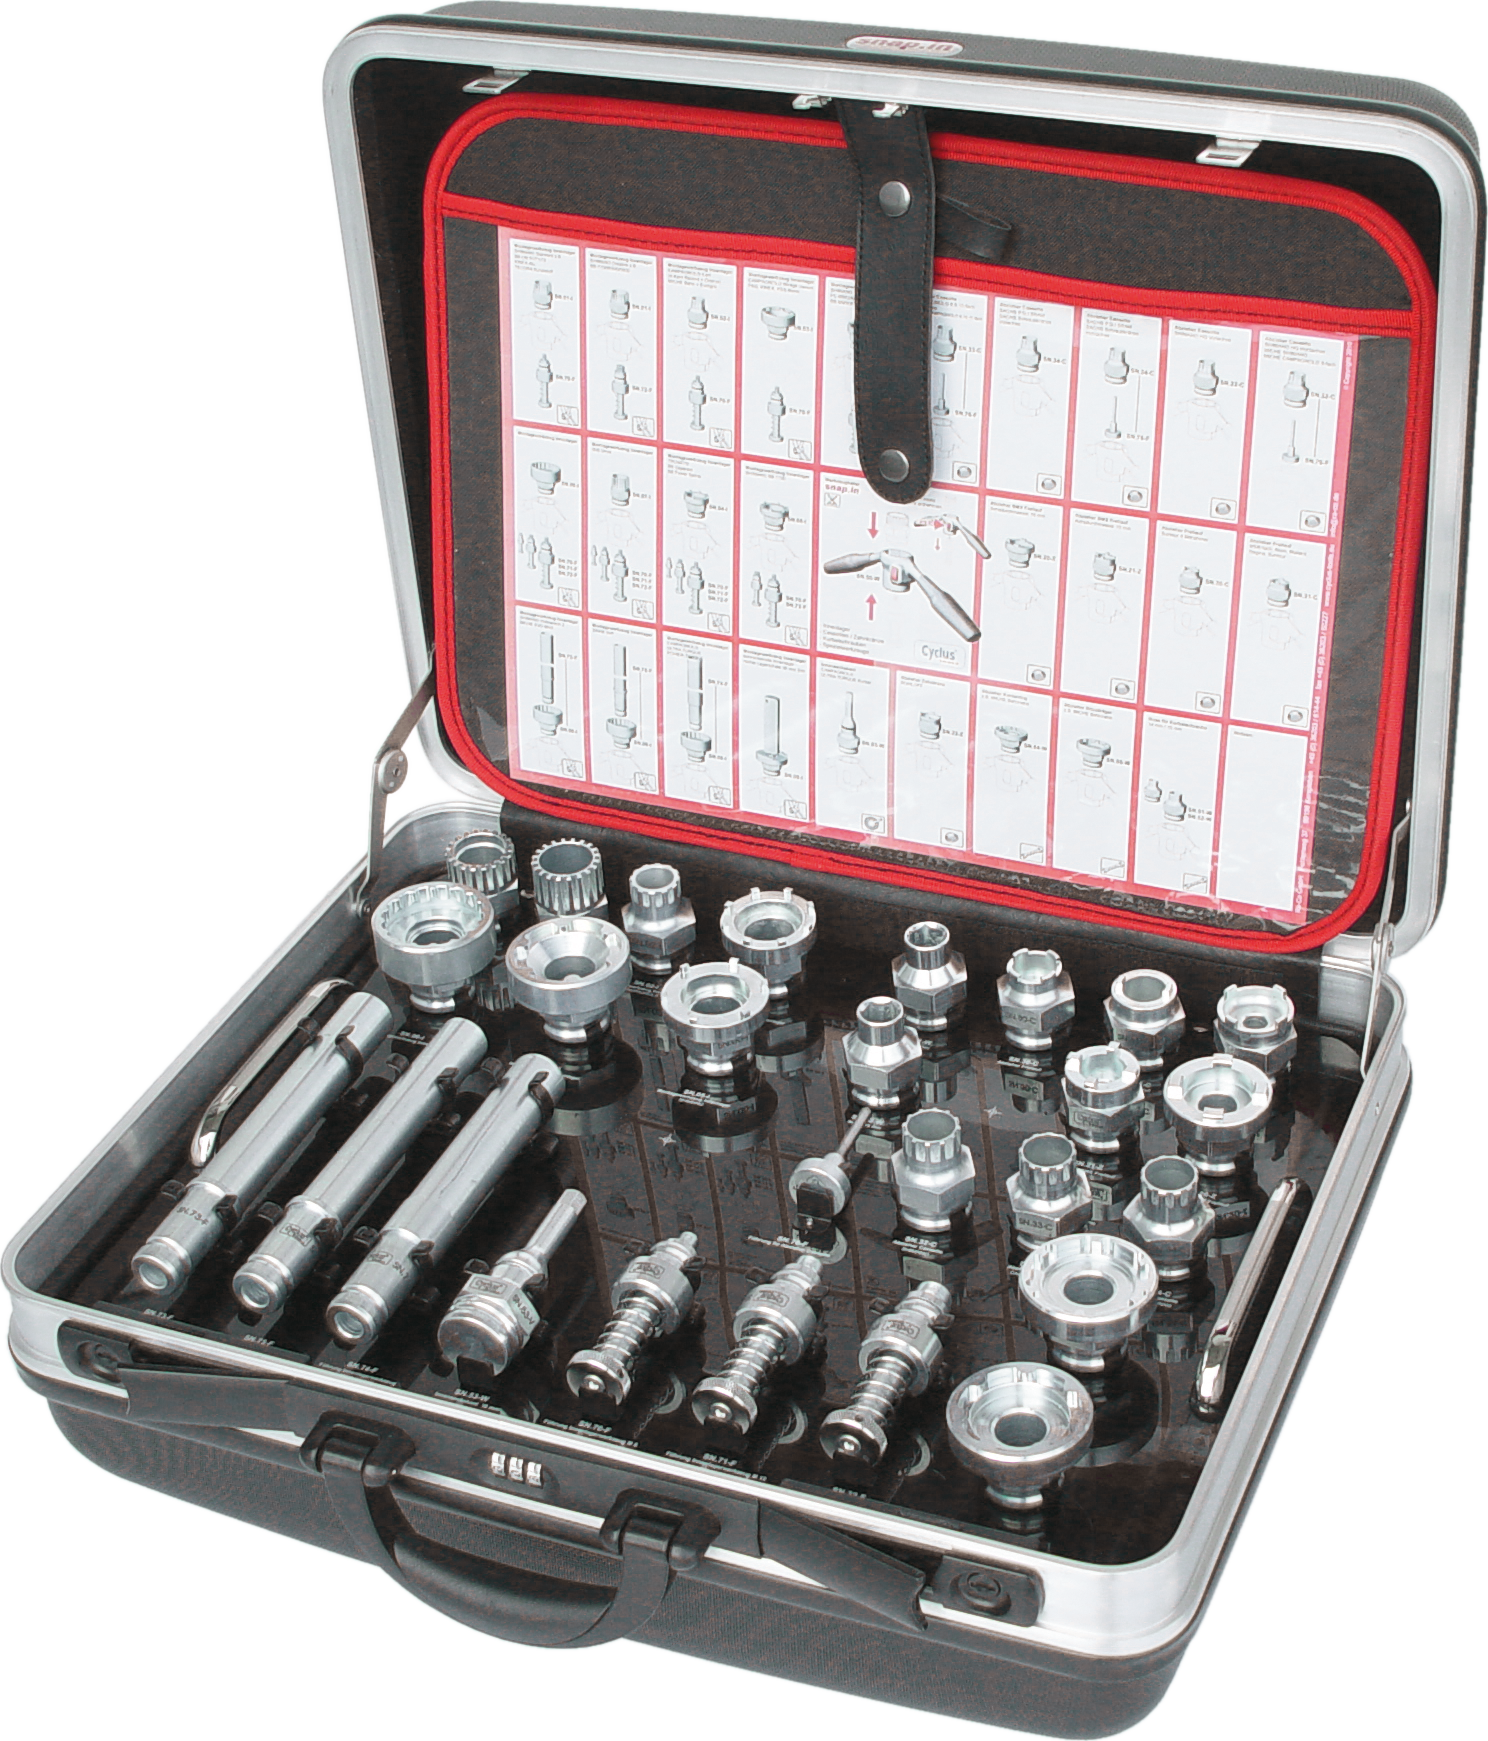 CYCLUS TOOLS workshop case incl. snap. incudes tools and holder